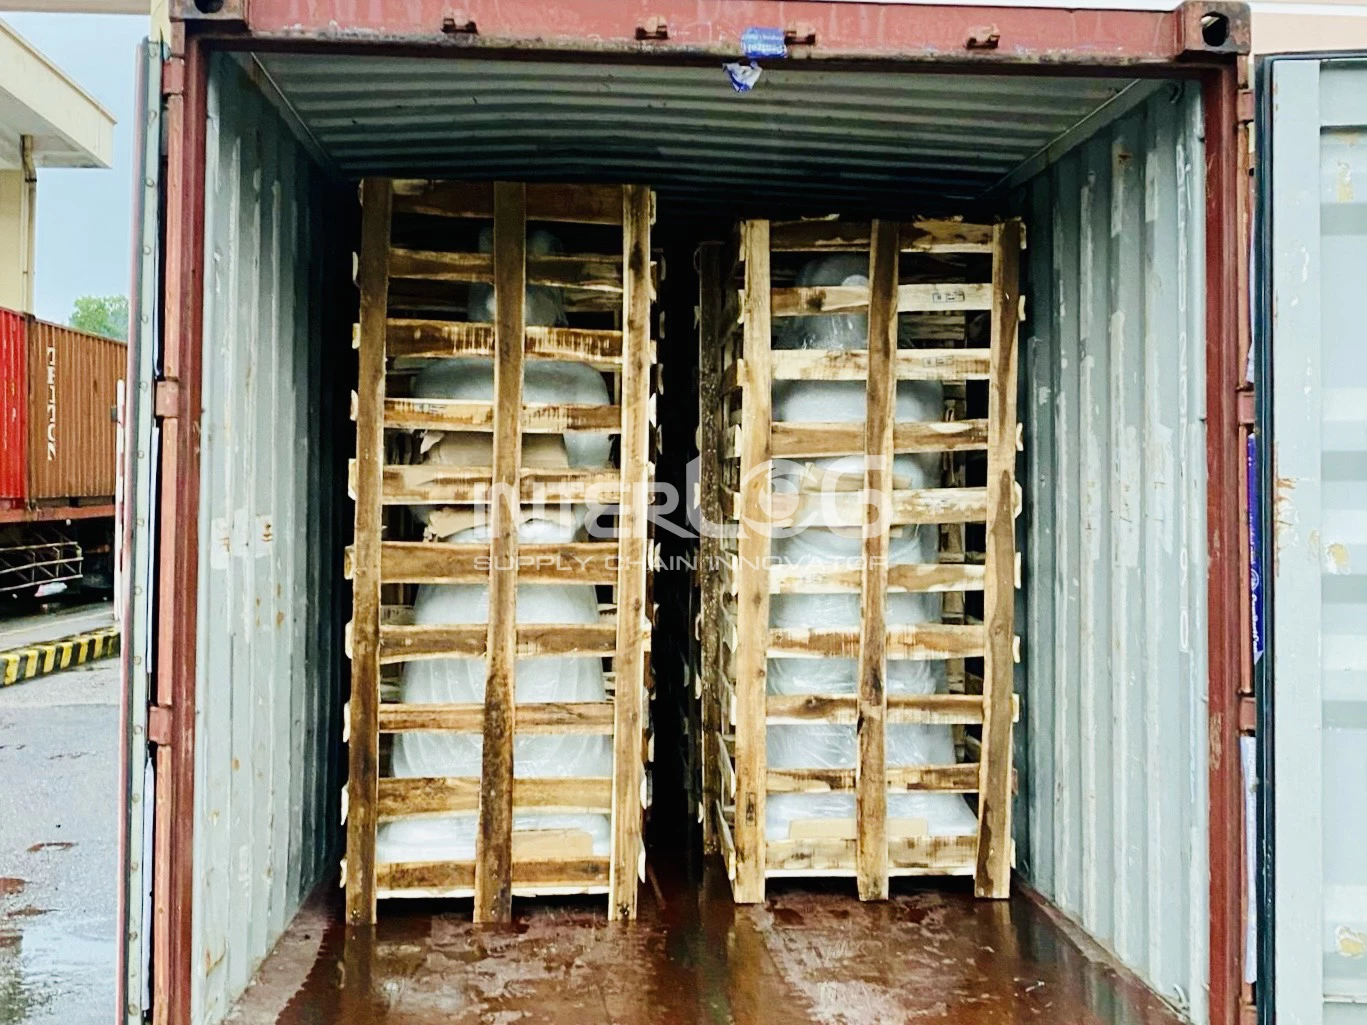 hinh-anh-dong-tuong-12-con-giap-vao-container